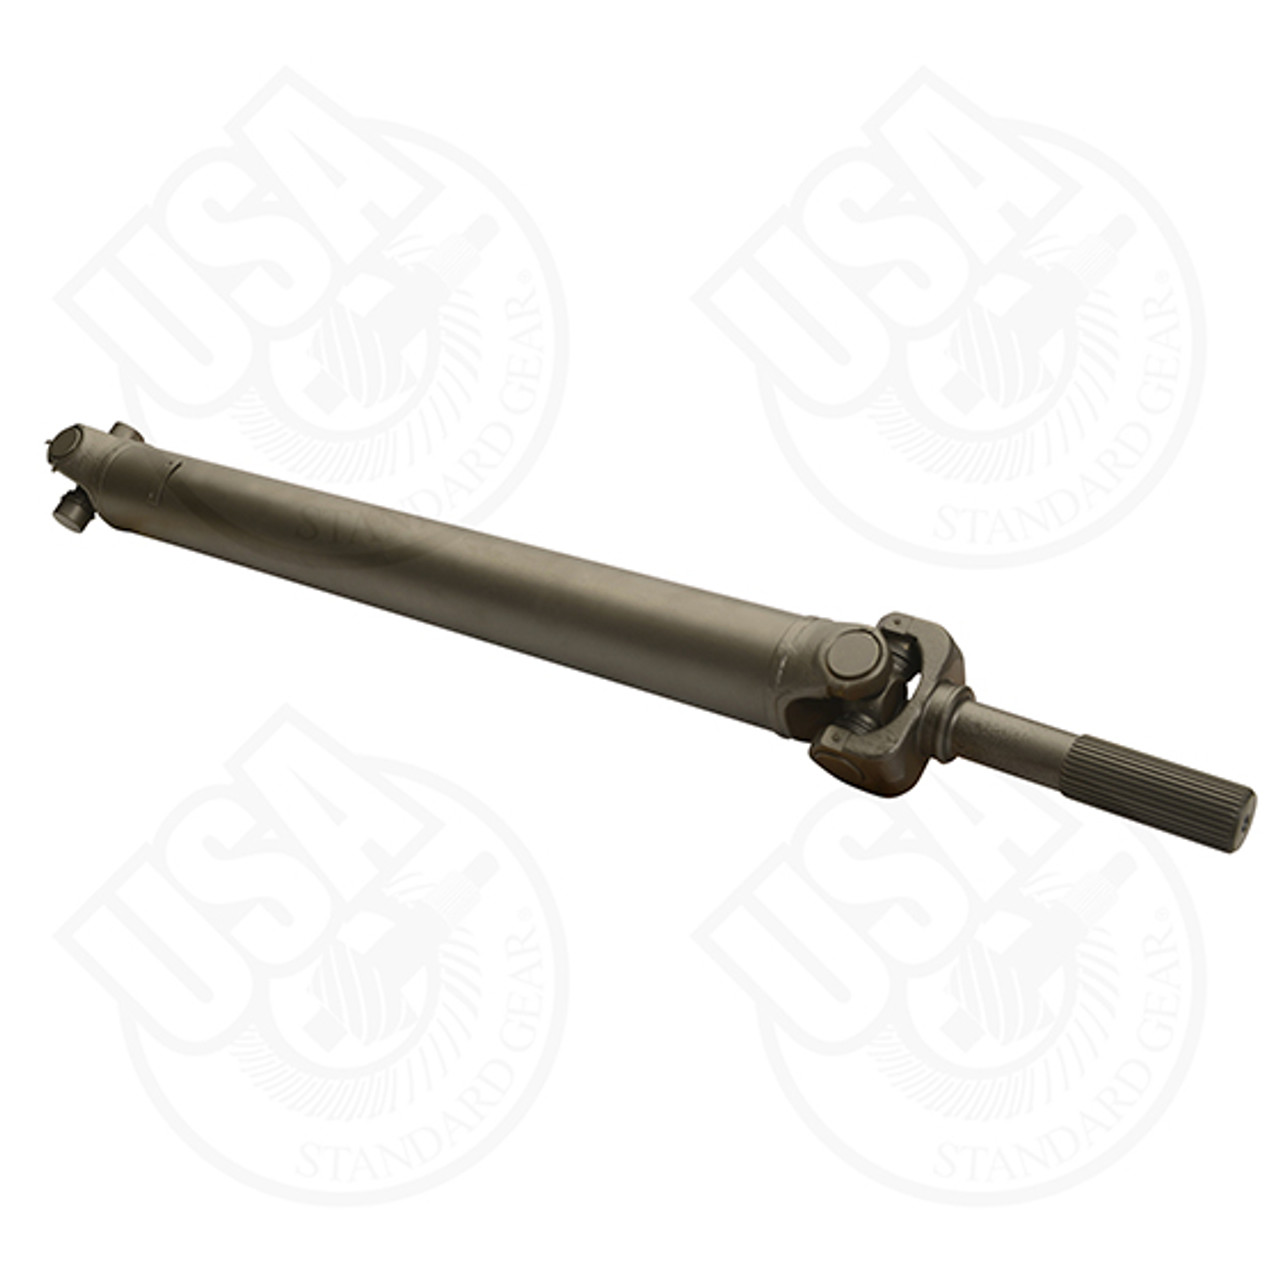 NEW USA Standard Front Driveshaft for Cadillac Escalade, GM Truck & SUV, 27-1/4" Weld to Weld